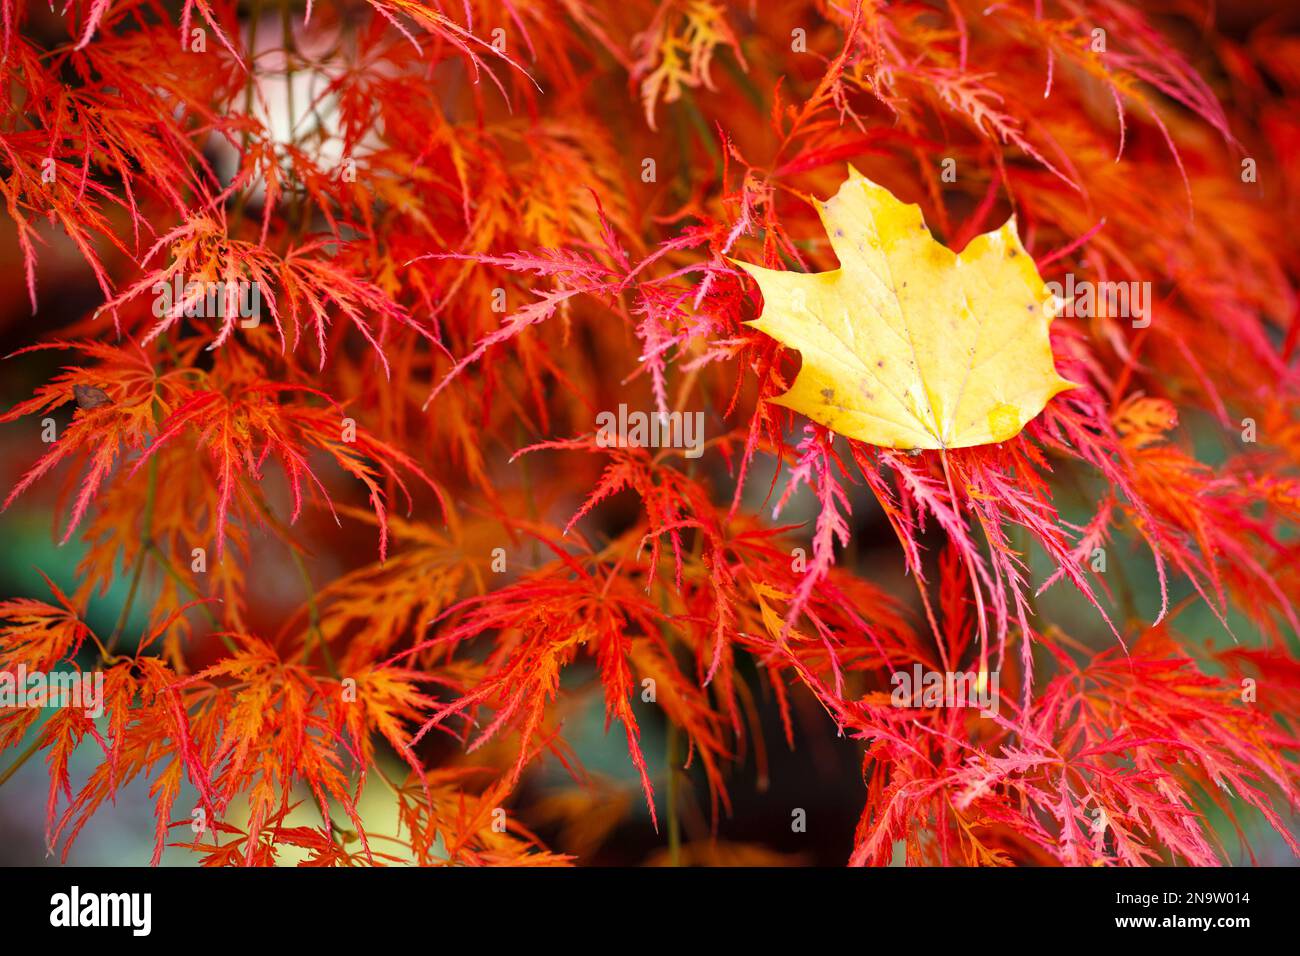 Yellow fallen leaf caught in red tree foliage in autumn; Portland, Oregon, United States of America Stock Photo